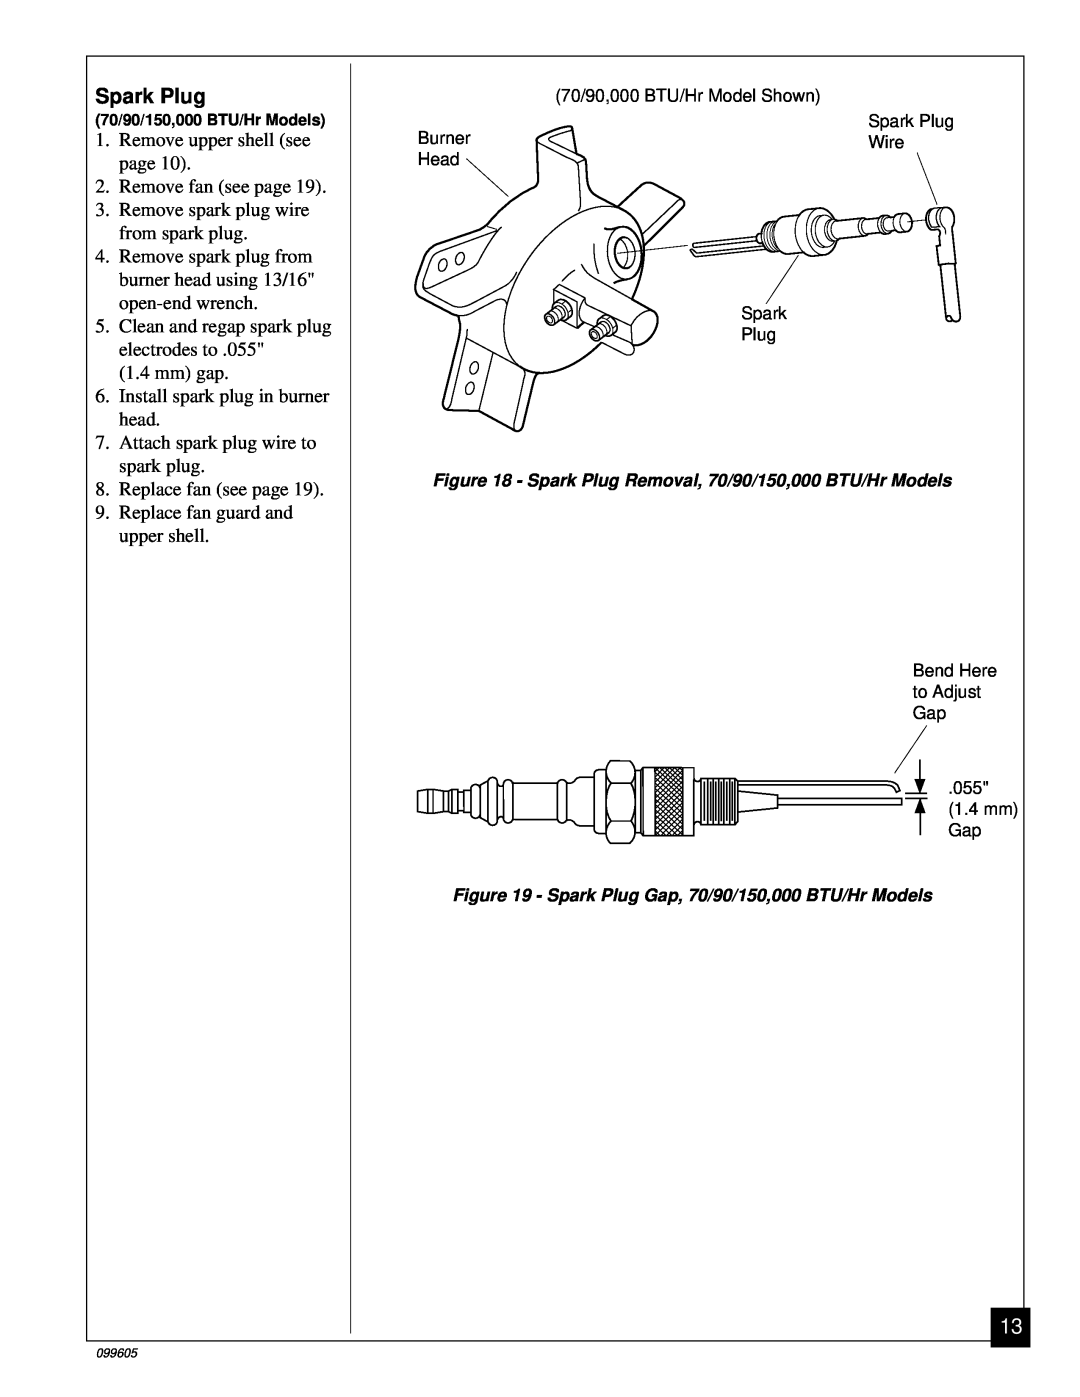 Desa H.S.I. Series owner manual Spark Plug, Remove upper shell see page 